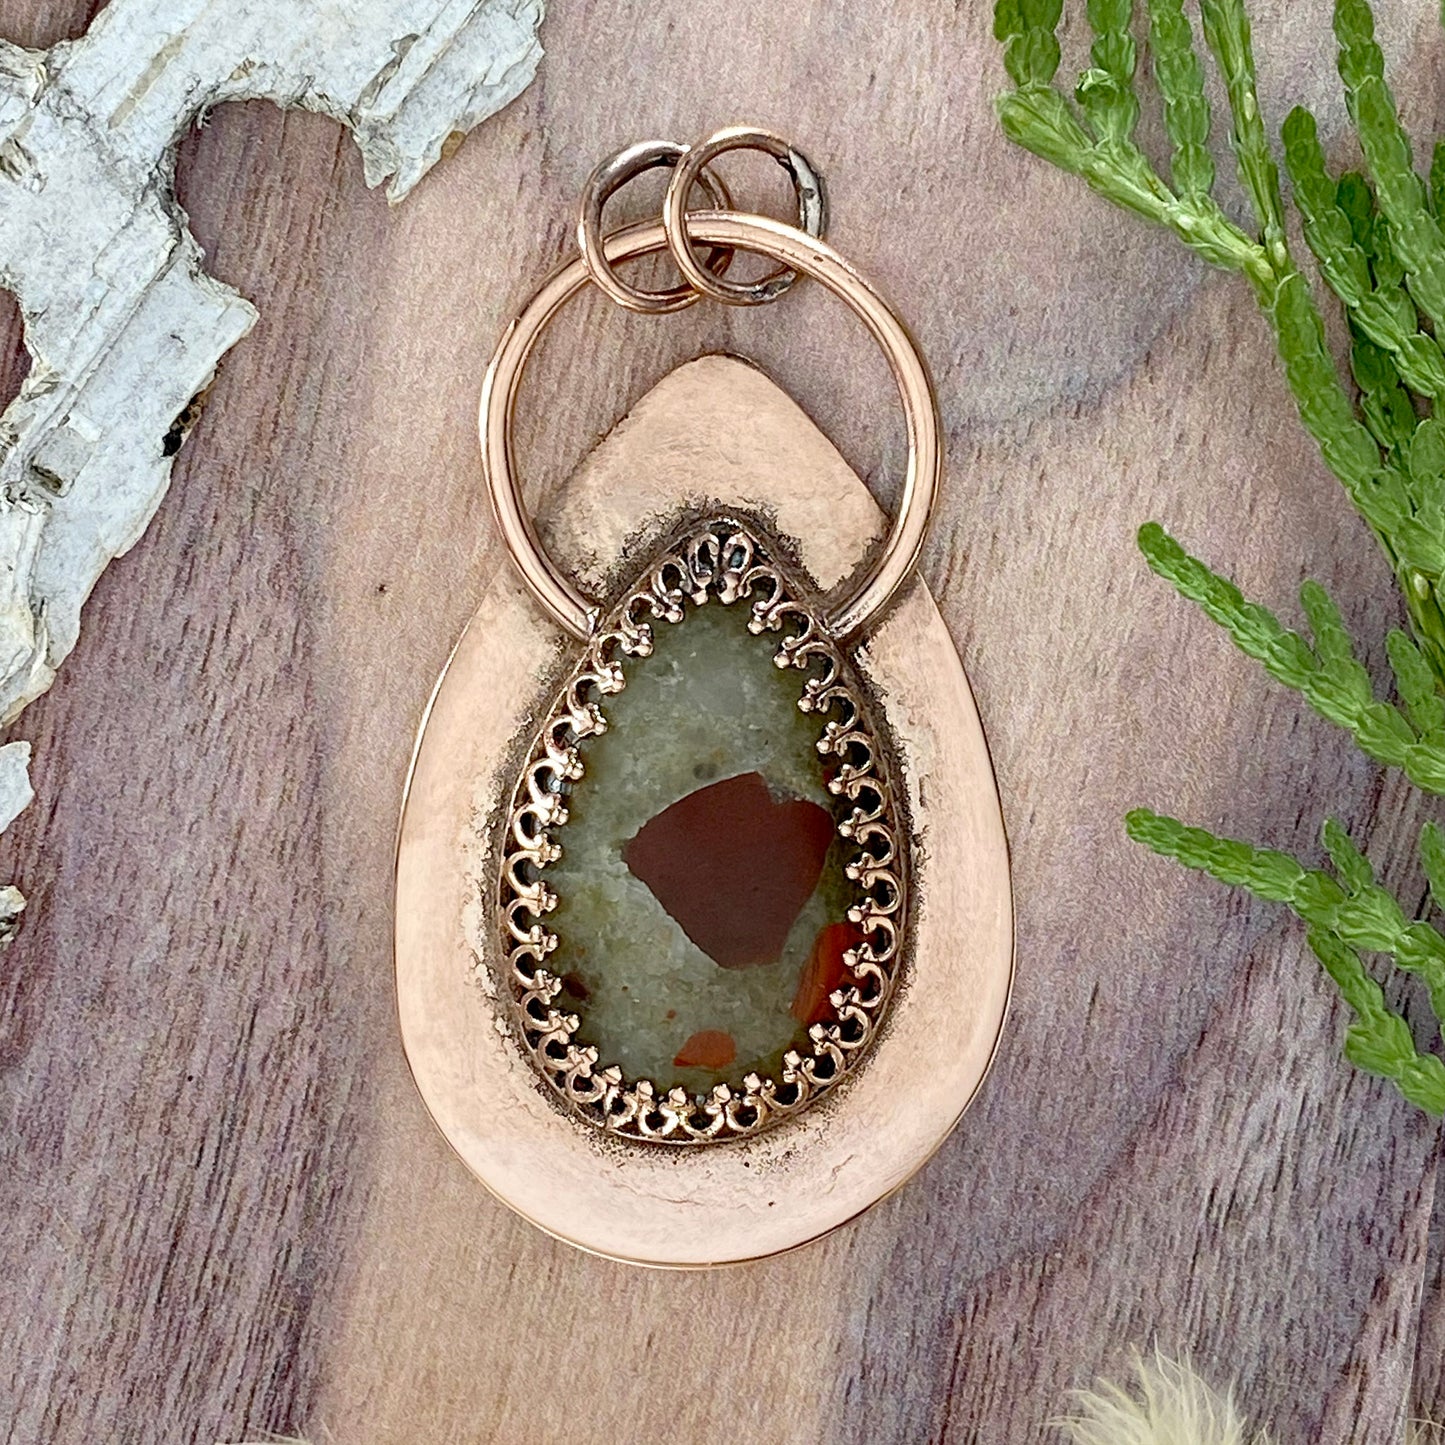 Puddingstone Pendant Front View - Stone Treasures by the Lake